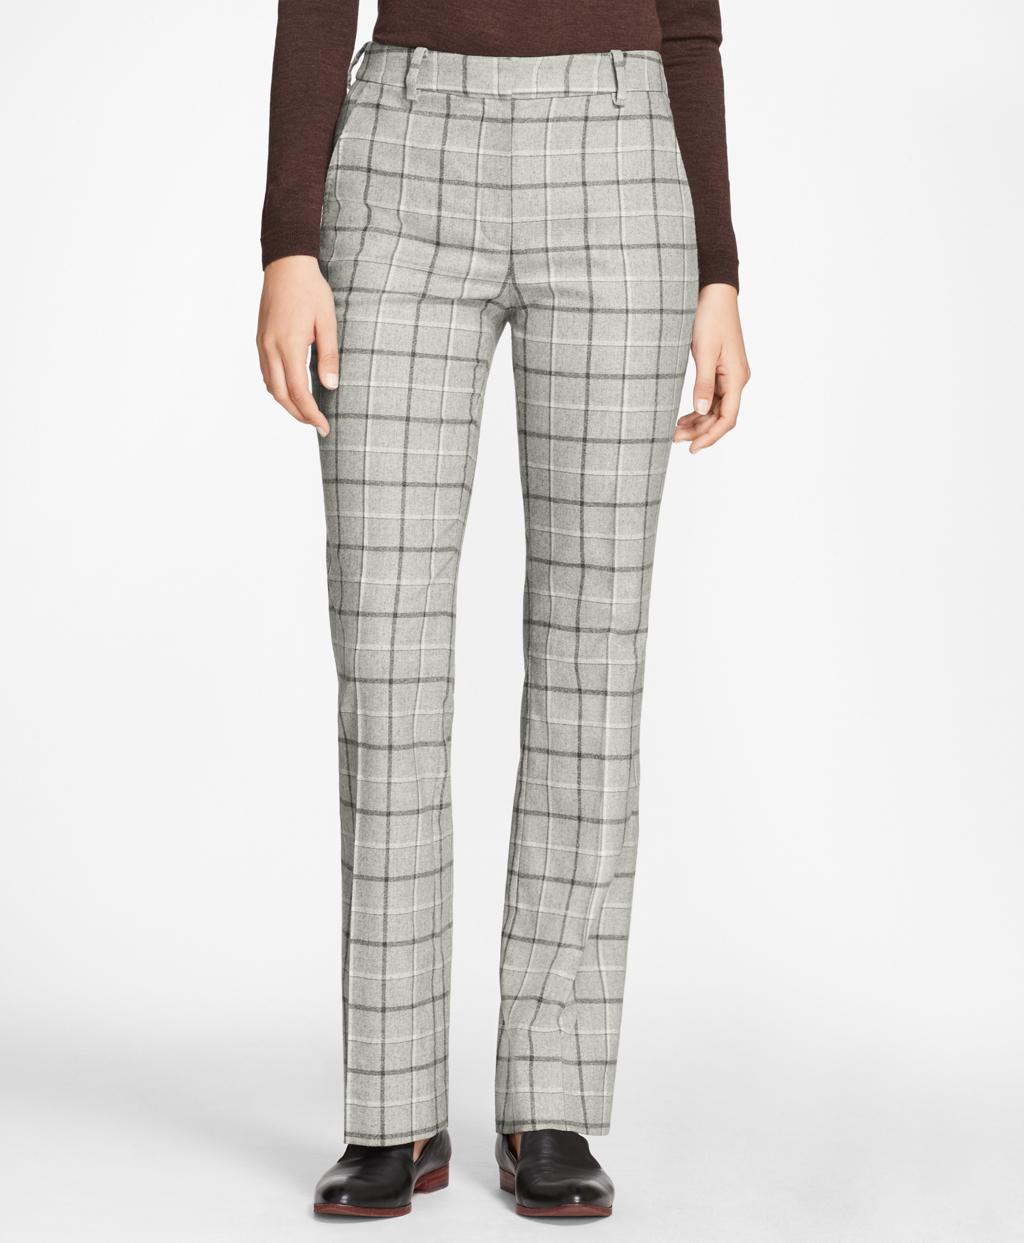 Lyst - Brooks Brothers Windowpane Stretch-wool-cashmere Pants in Gray